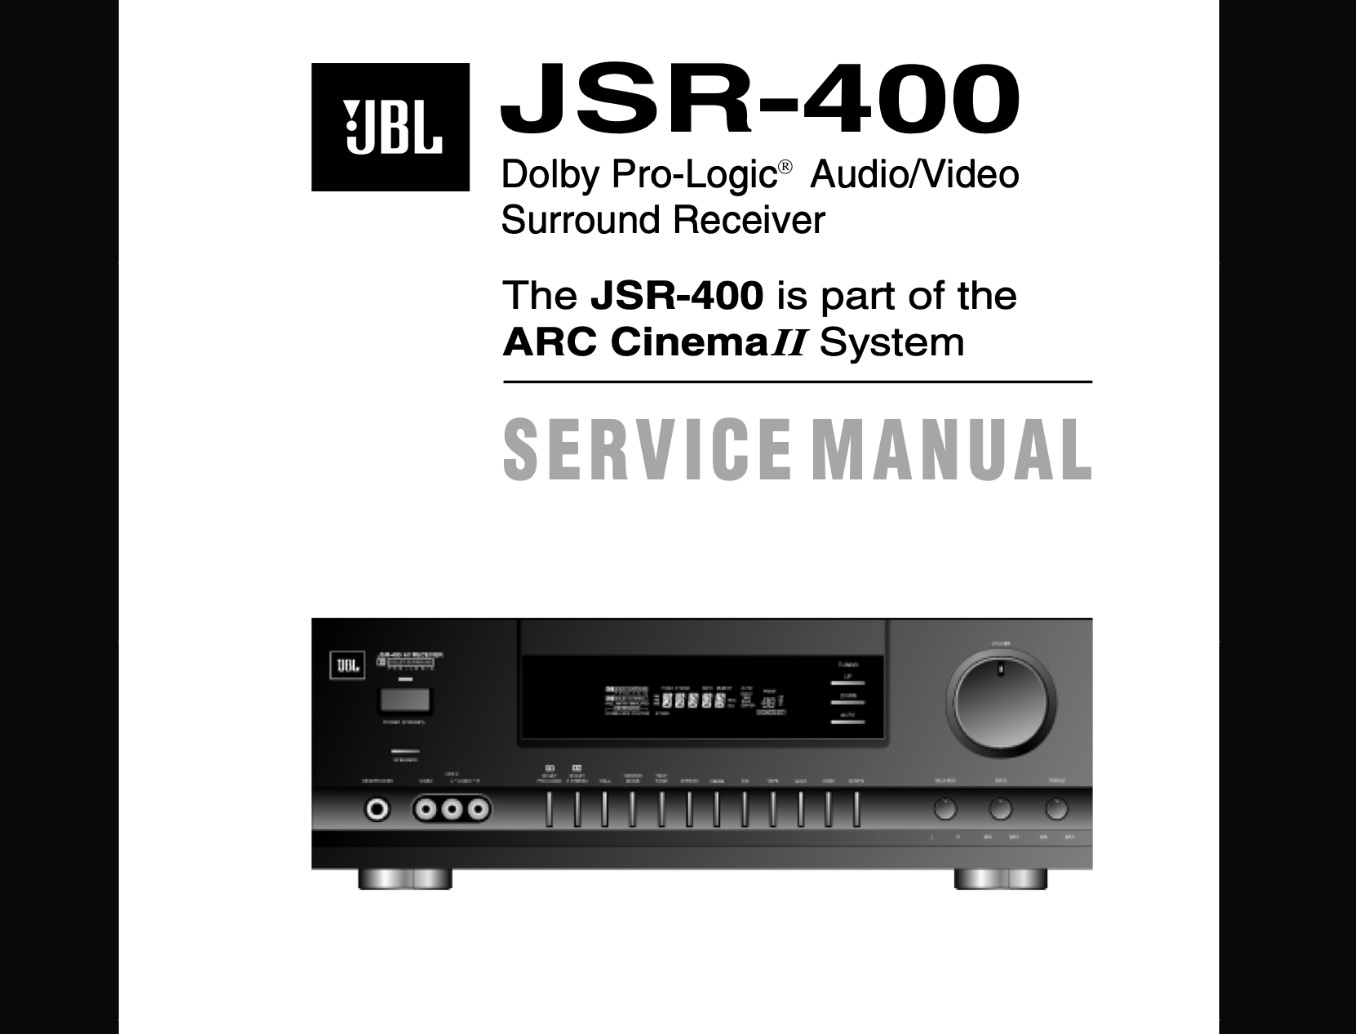 JBL JSR  A/V Dolby Pro-Logic Surround Receiver Service Manual, Exploded View, Schematic Diagram, Cirquit Board